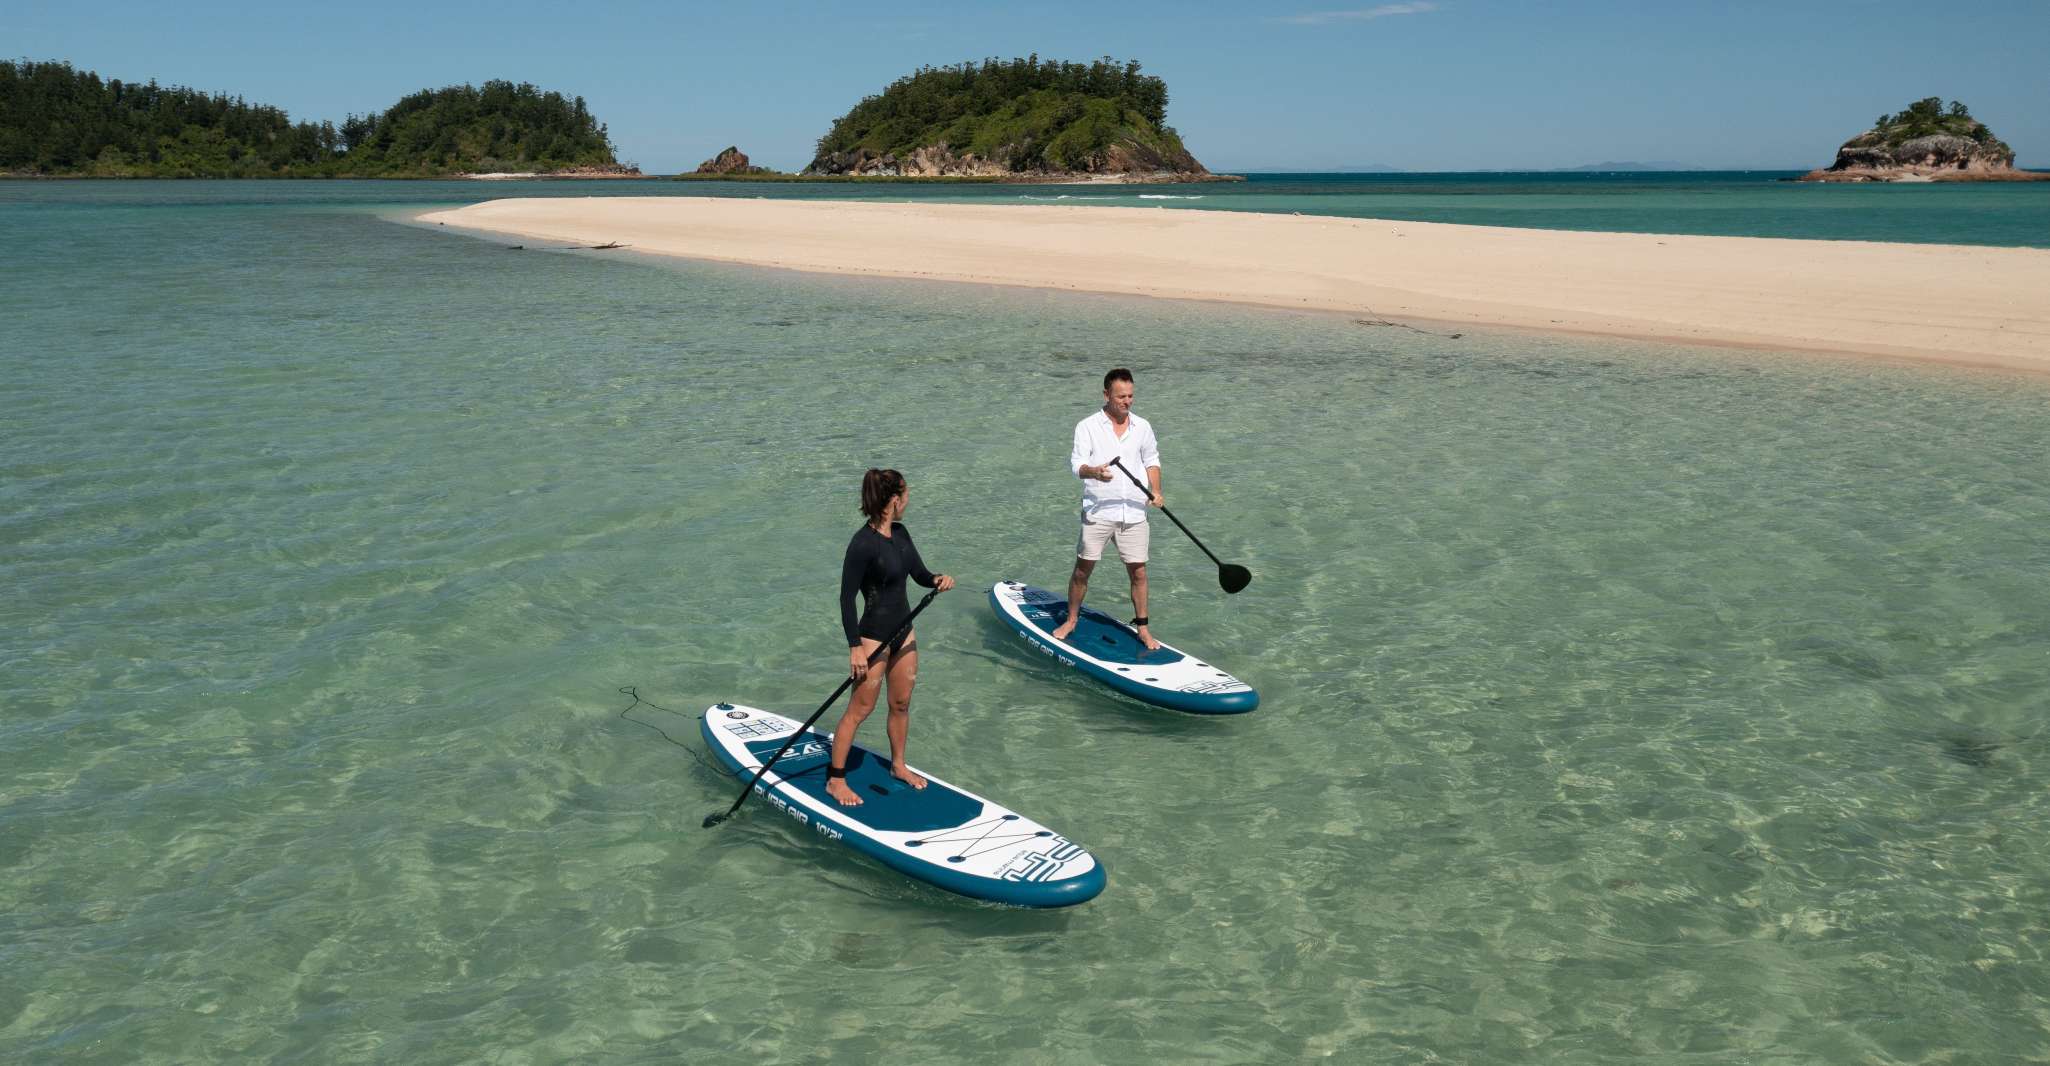 Mackay, Full Day Island Boat Tour on the Great Barrier Reef - Housity